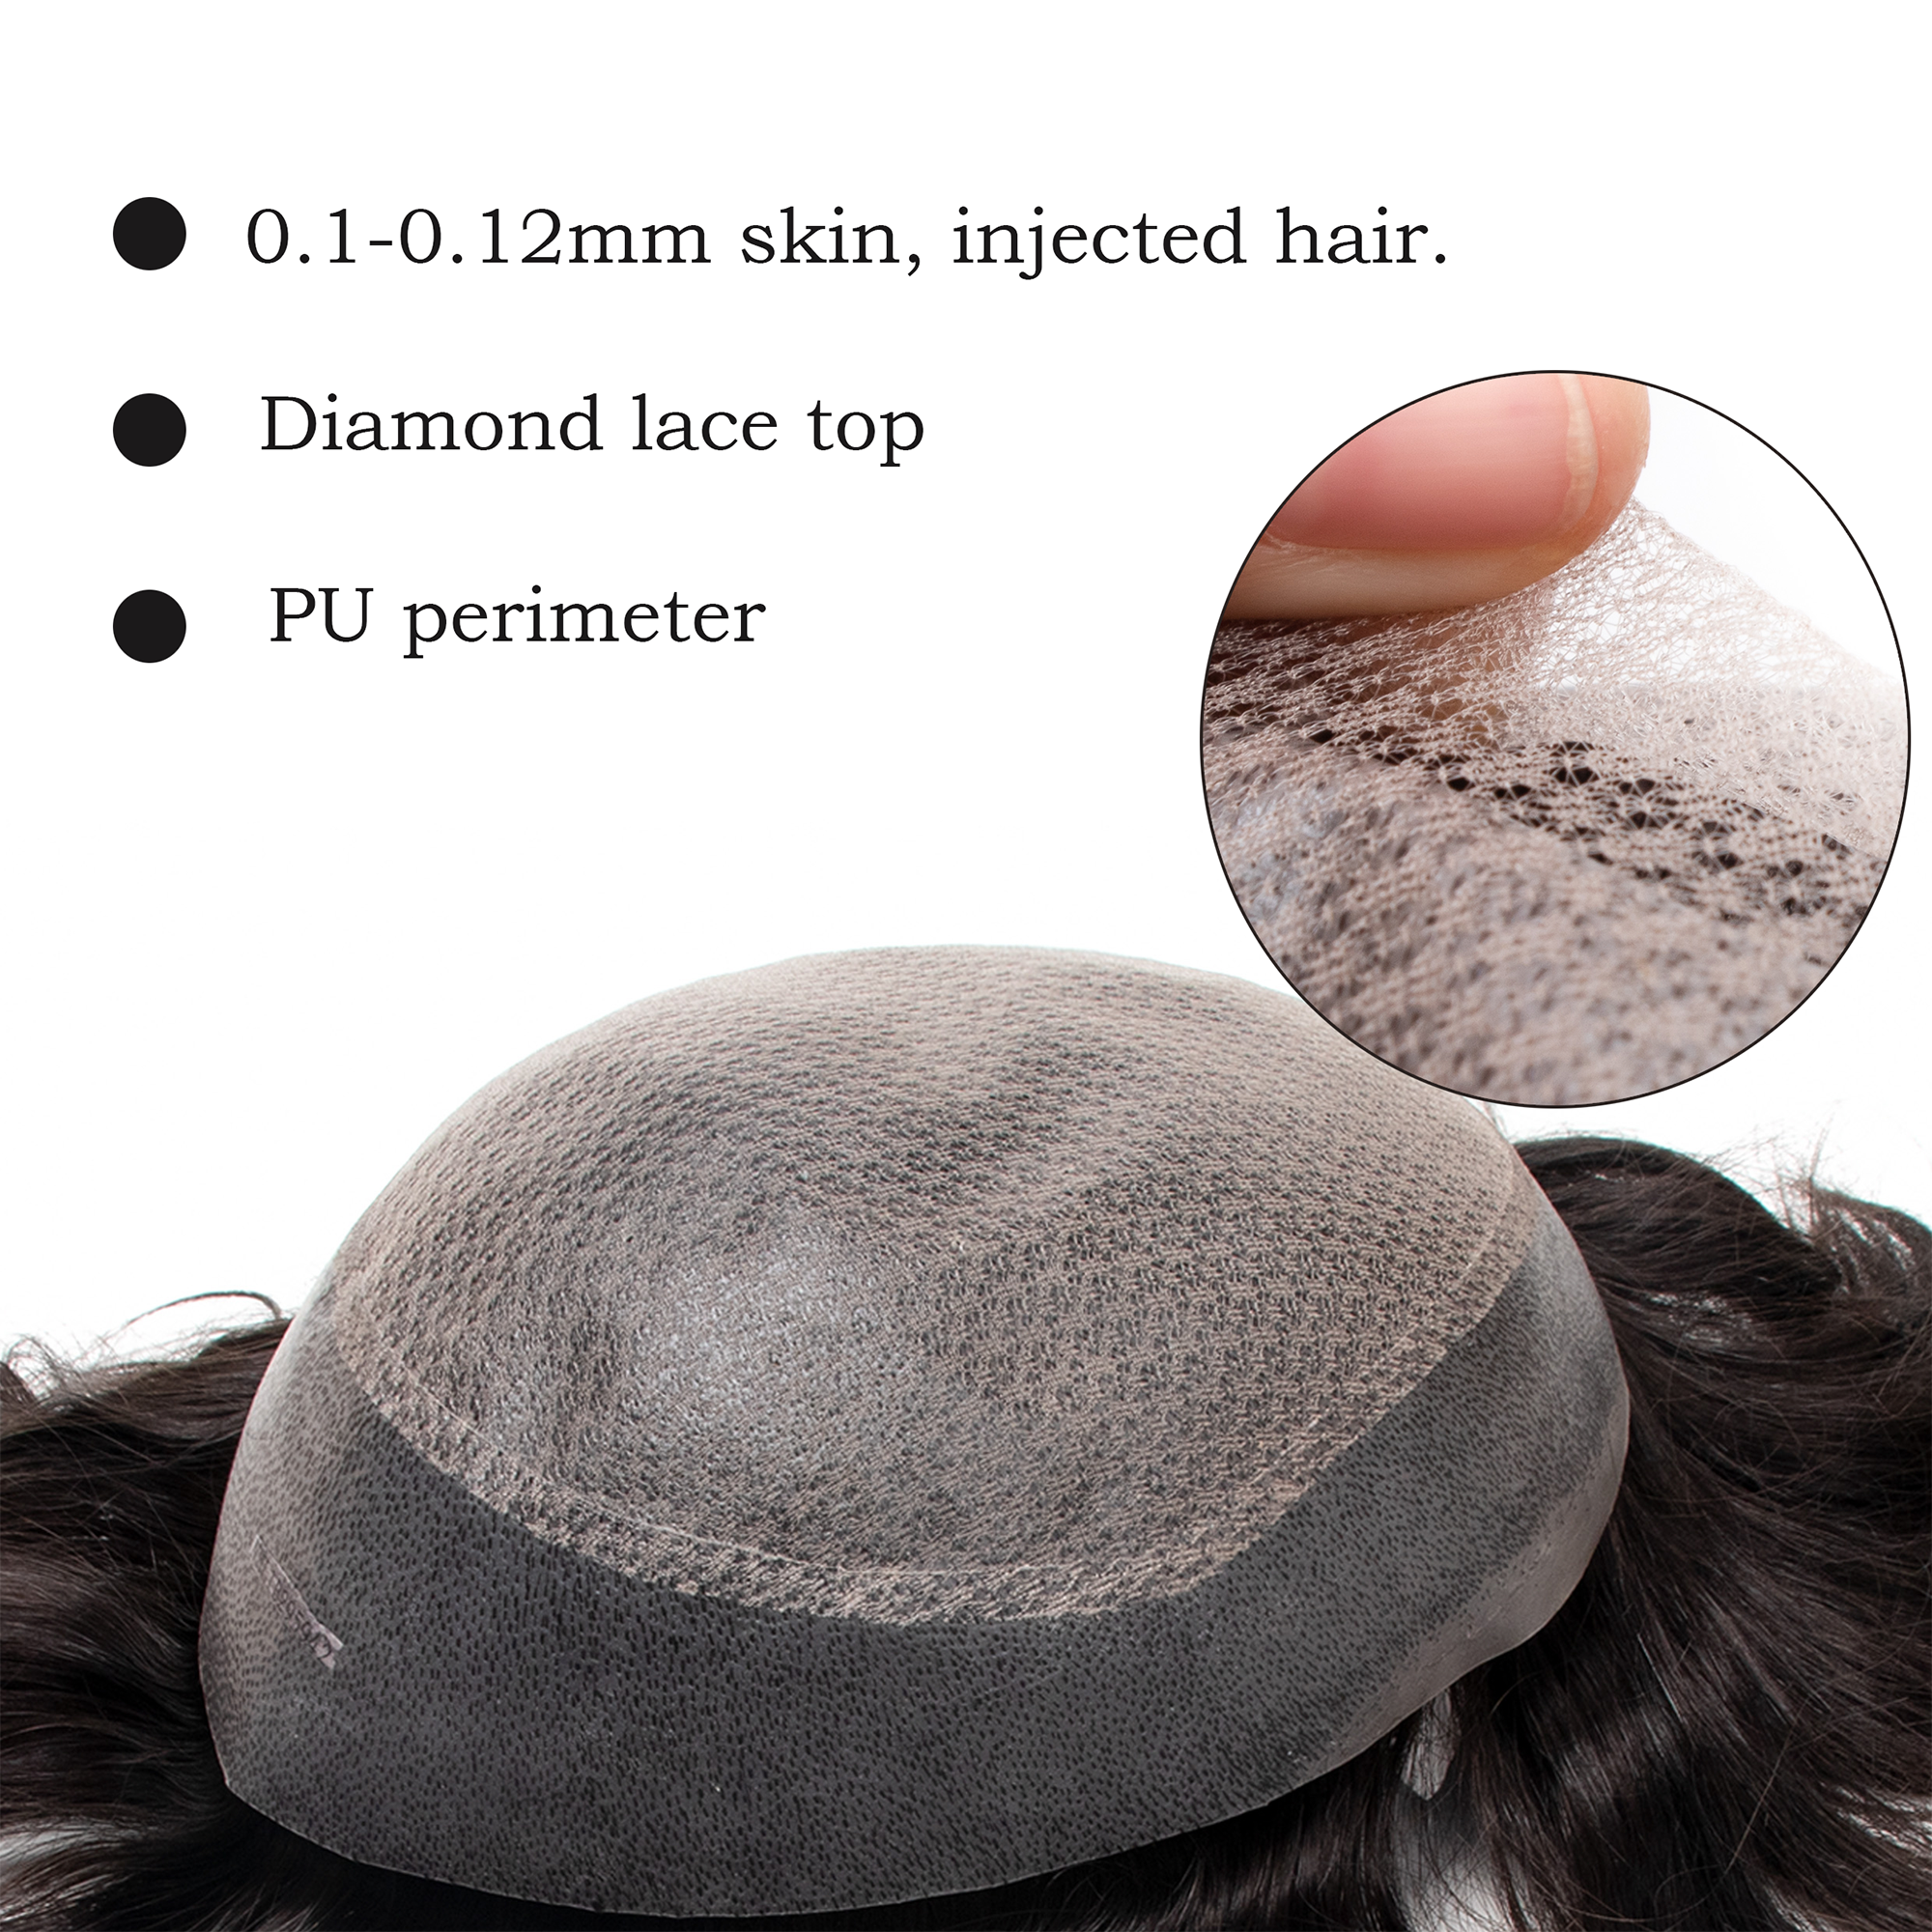 GEXWIGS M-Lace Men's Hairpiece Injection Skin Diamond Lace Center Toupee | M-Lace.